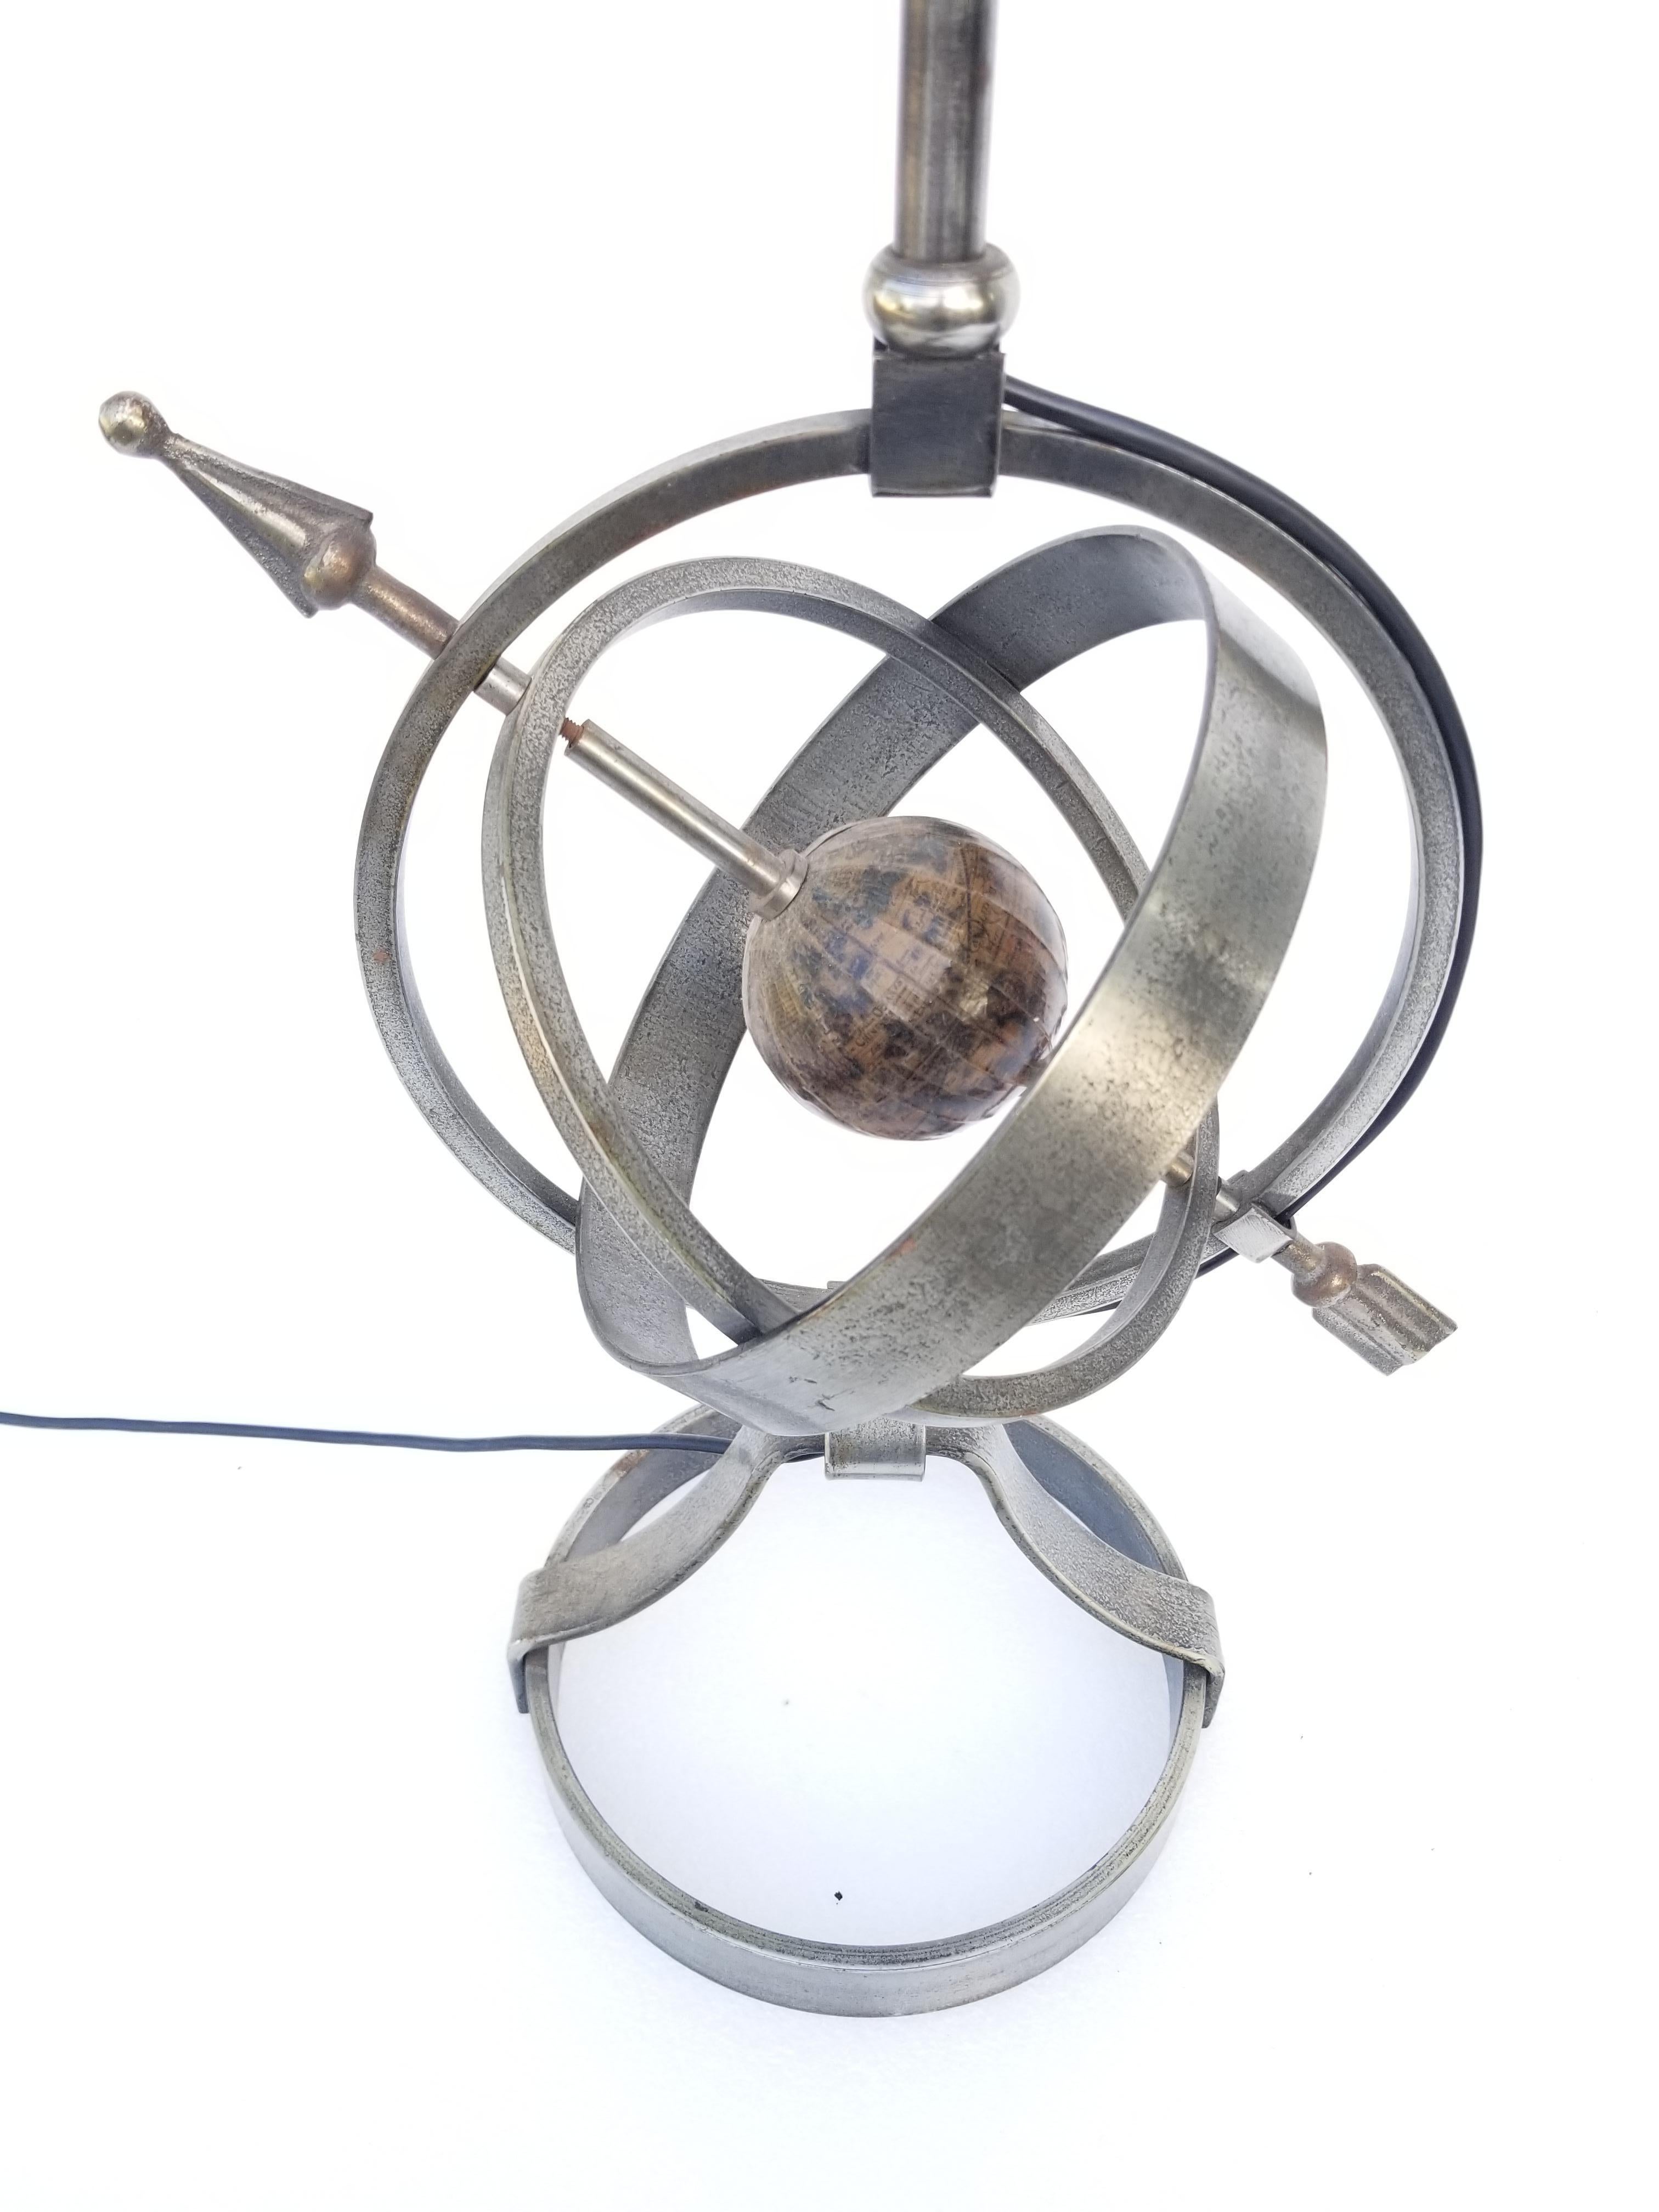 Astrolabe table lamp in the style of Jacques Adnet, polished iron
1 light, 100 watt max bulb.